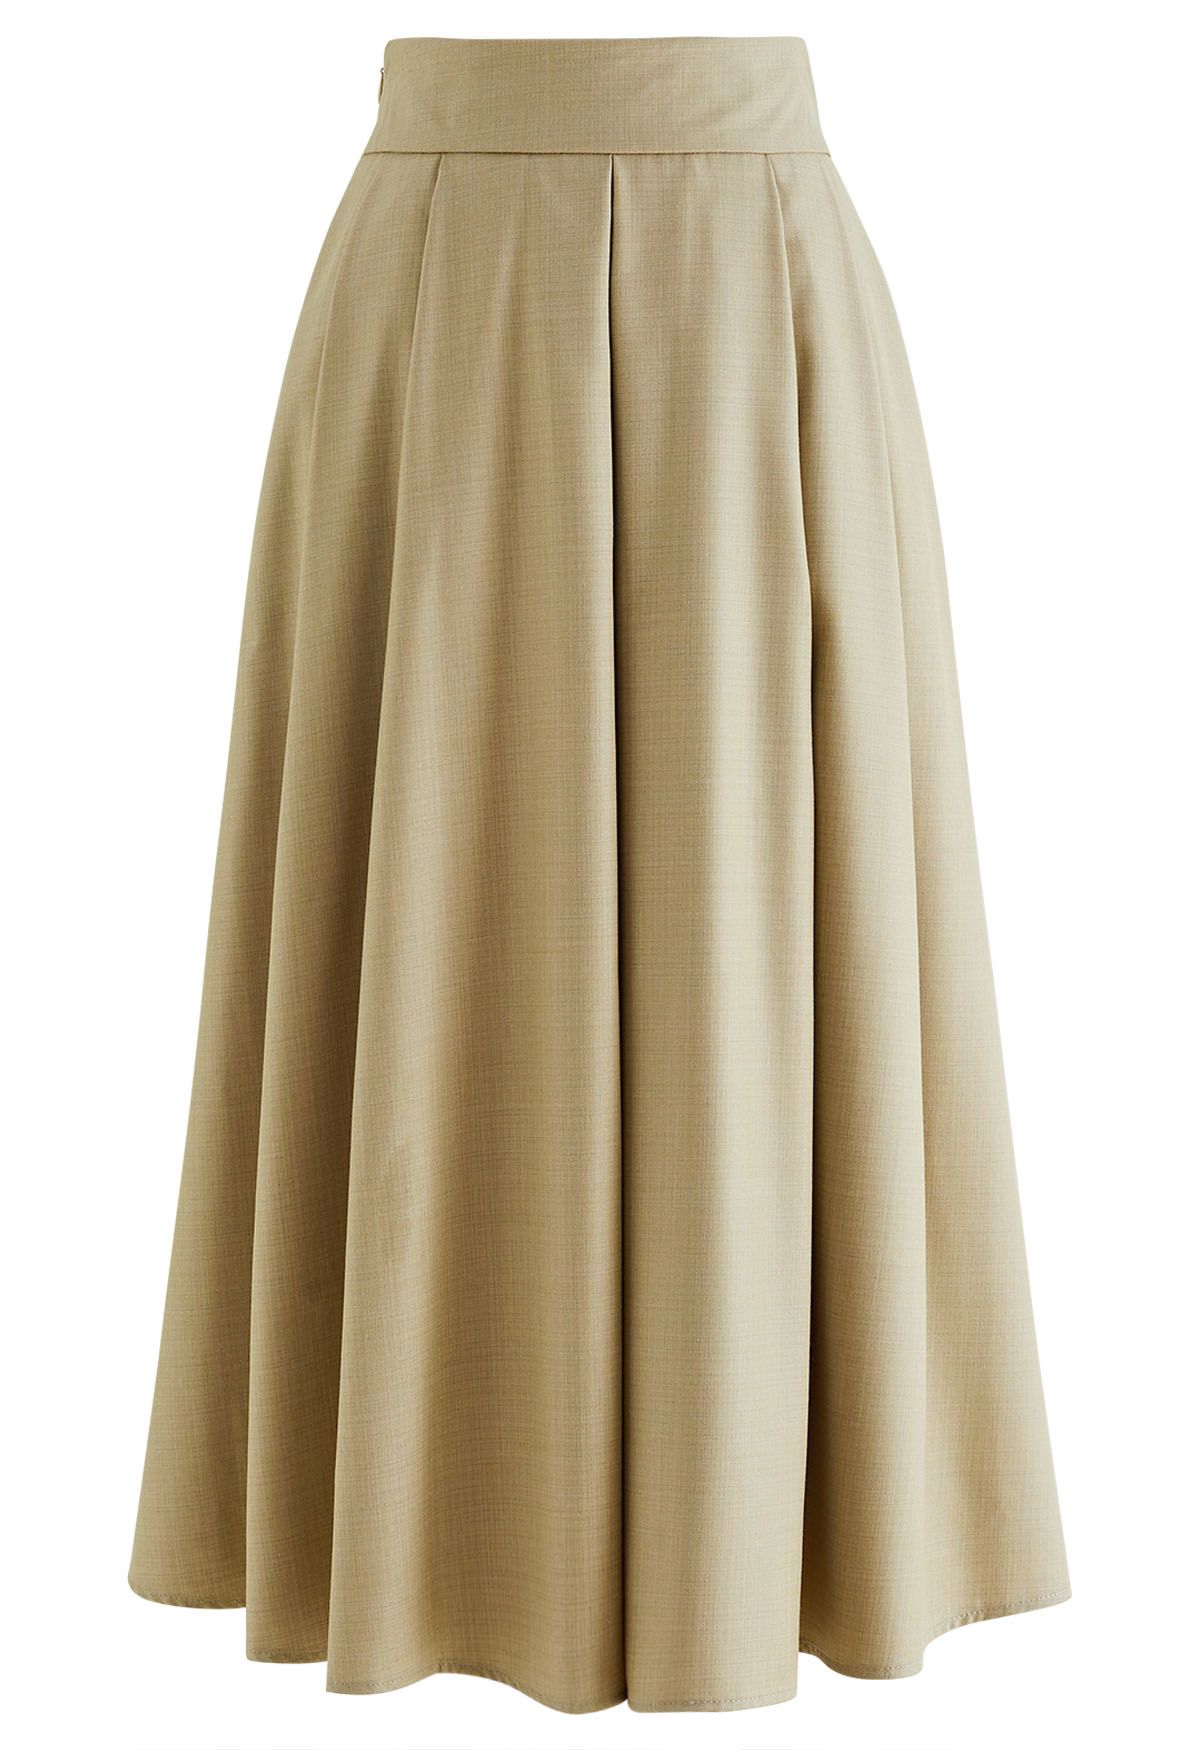 Side Pockets Pleated Midi Skirt in Khaki - Retro, Indie and Unique Fashion